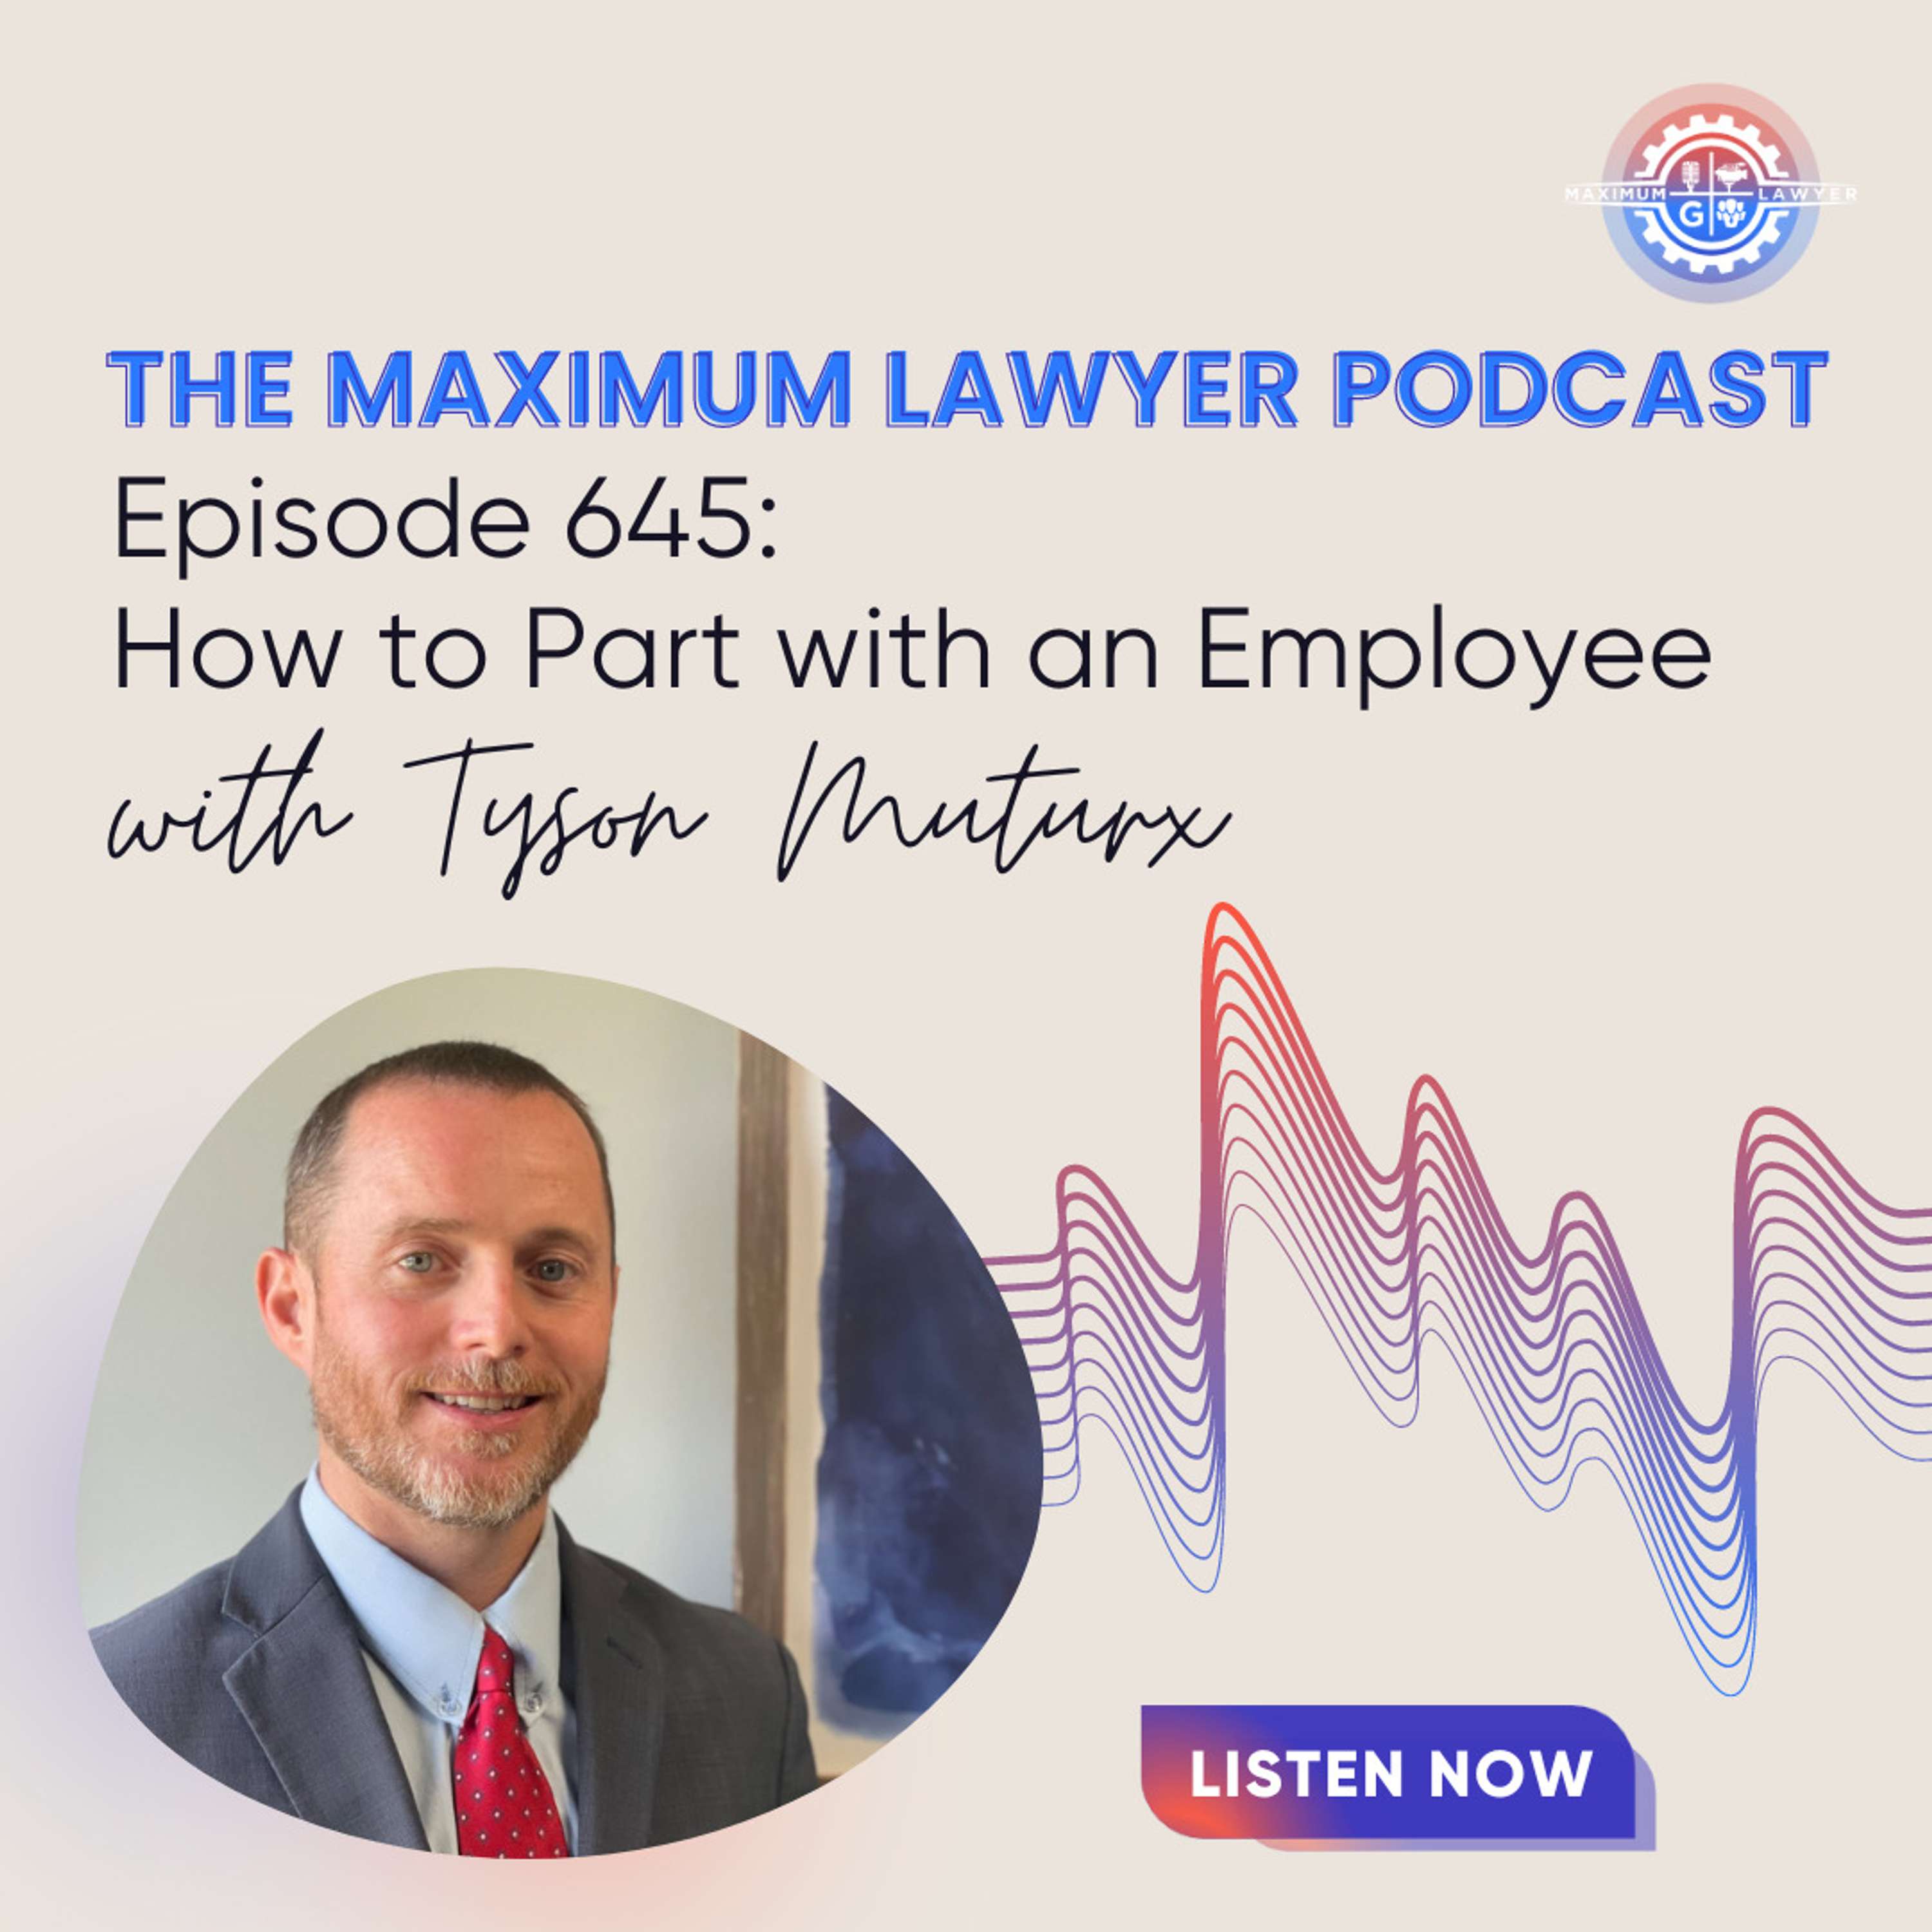 How to Part with an Employee with Tyson Mutrux